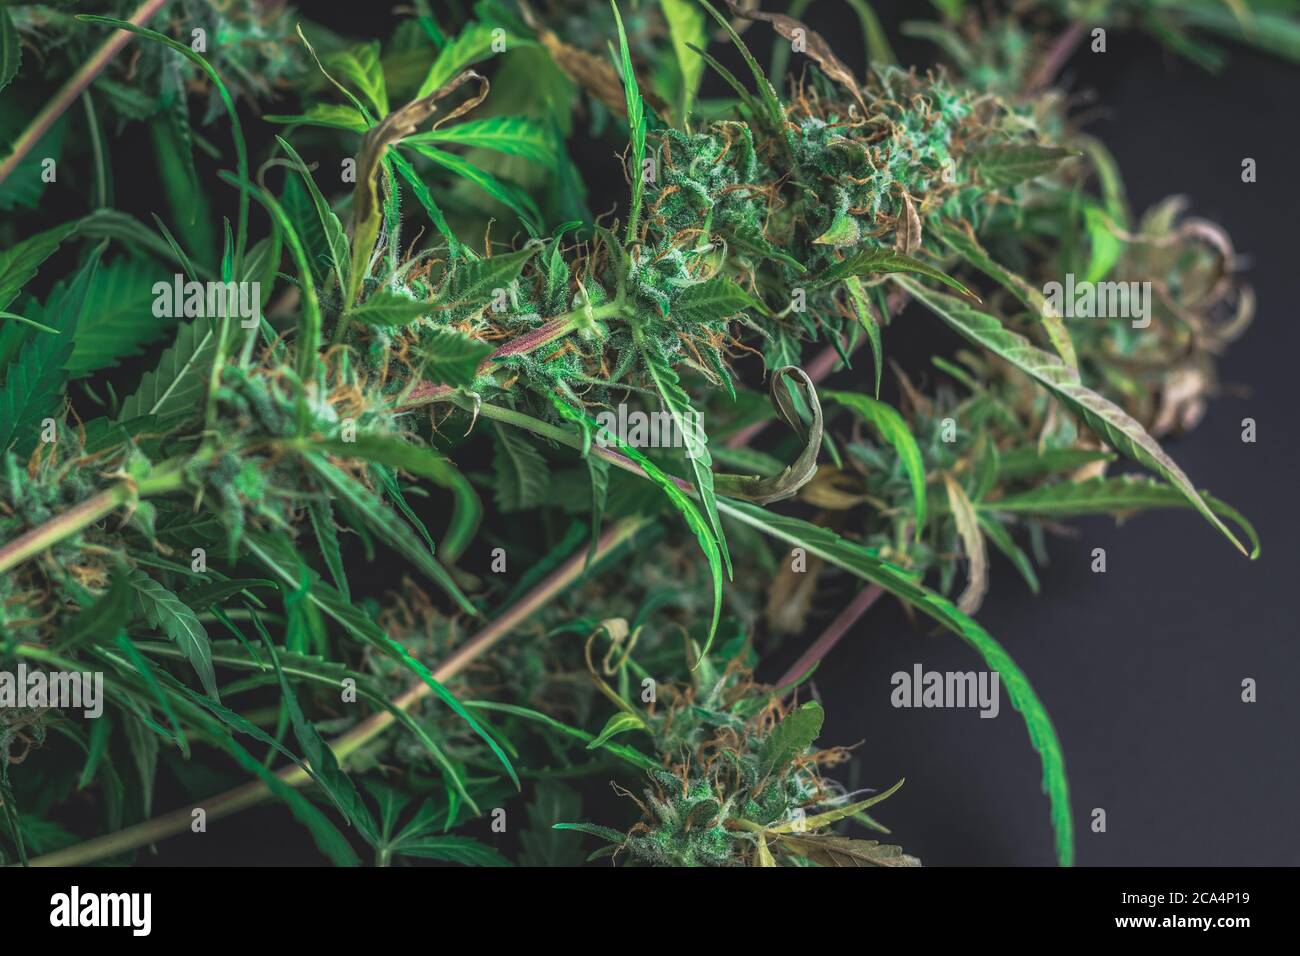 Cannabis plants on black background with copy space. Harvest, trimming and curing of marijuana buds for medical use Stock Photo